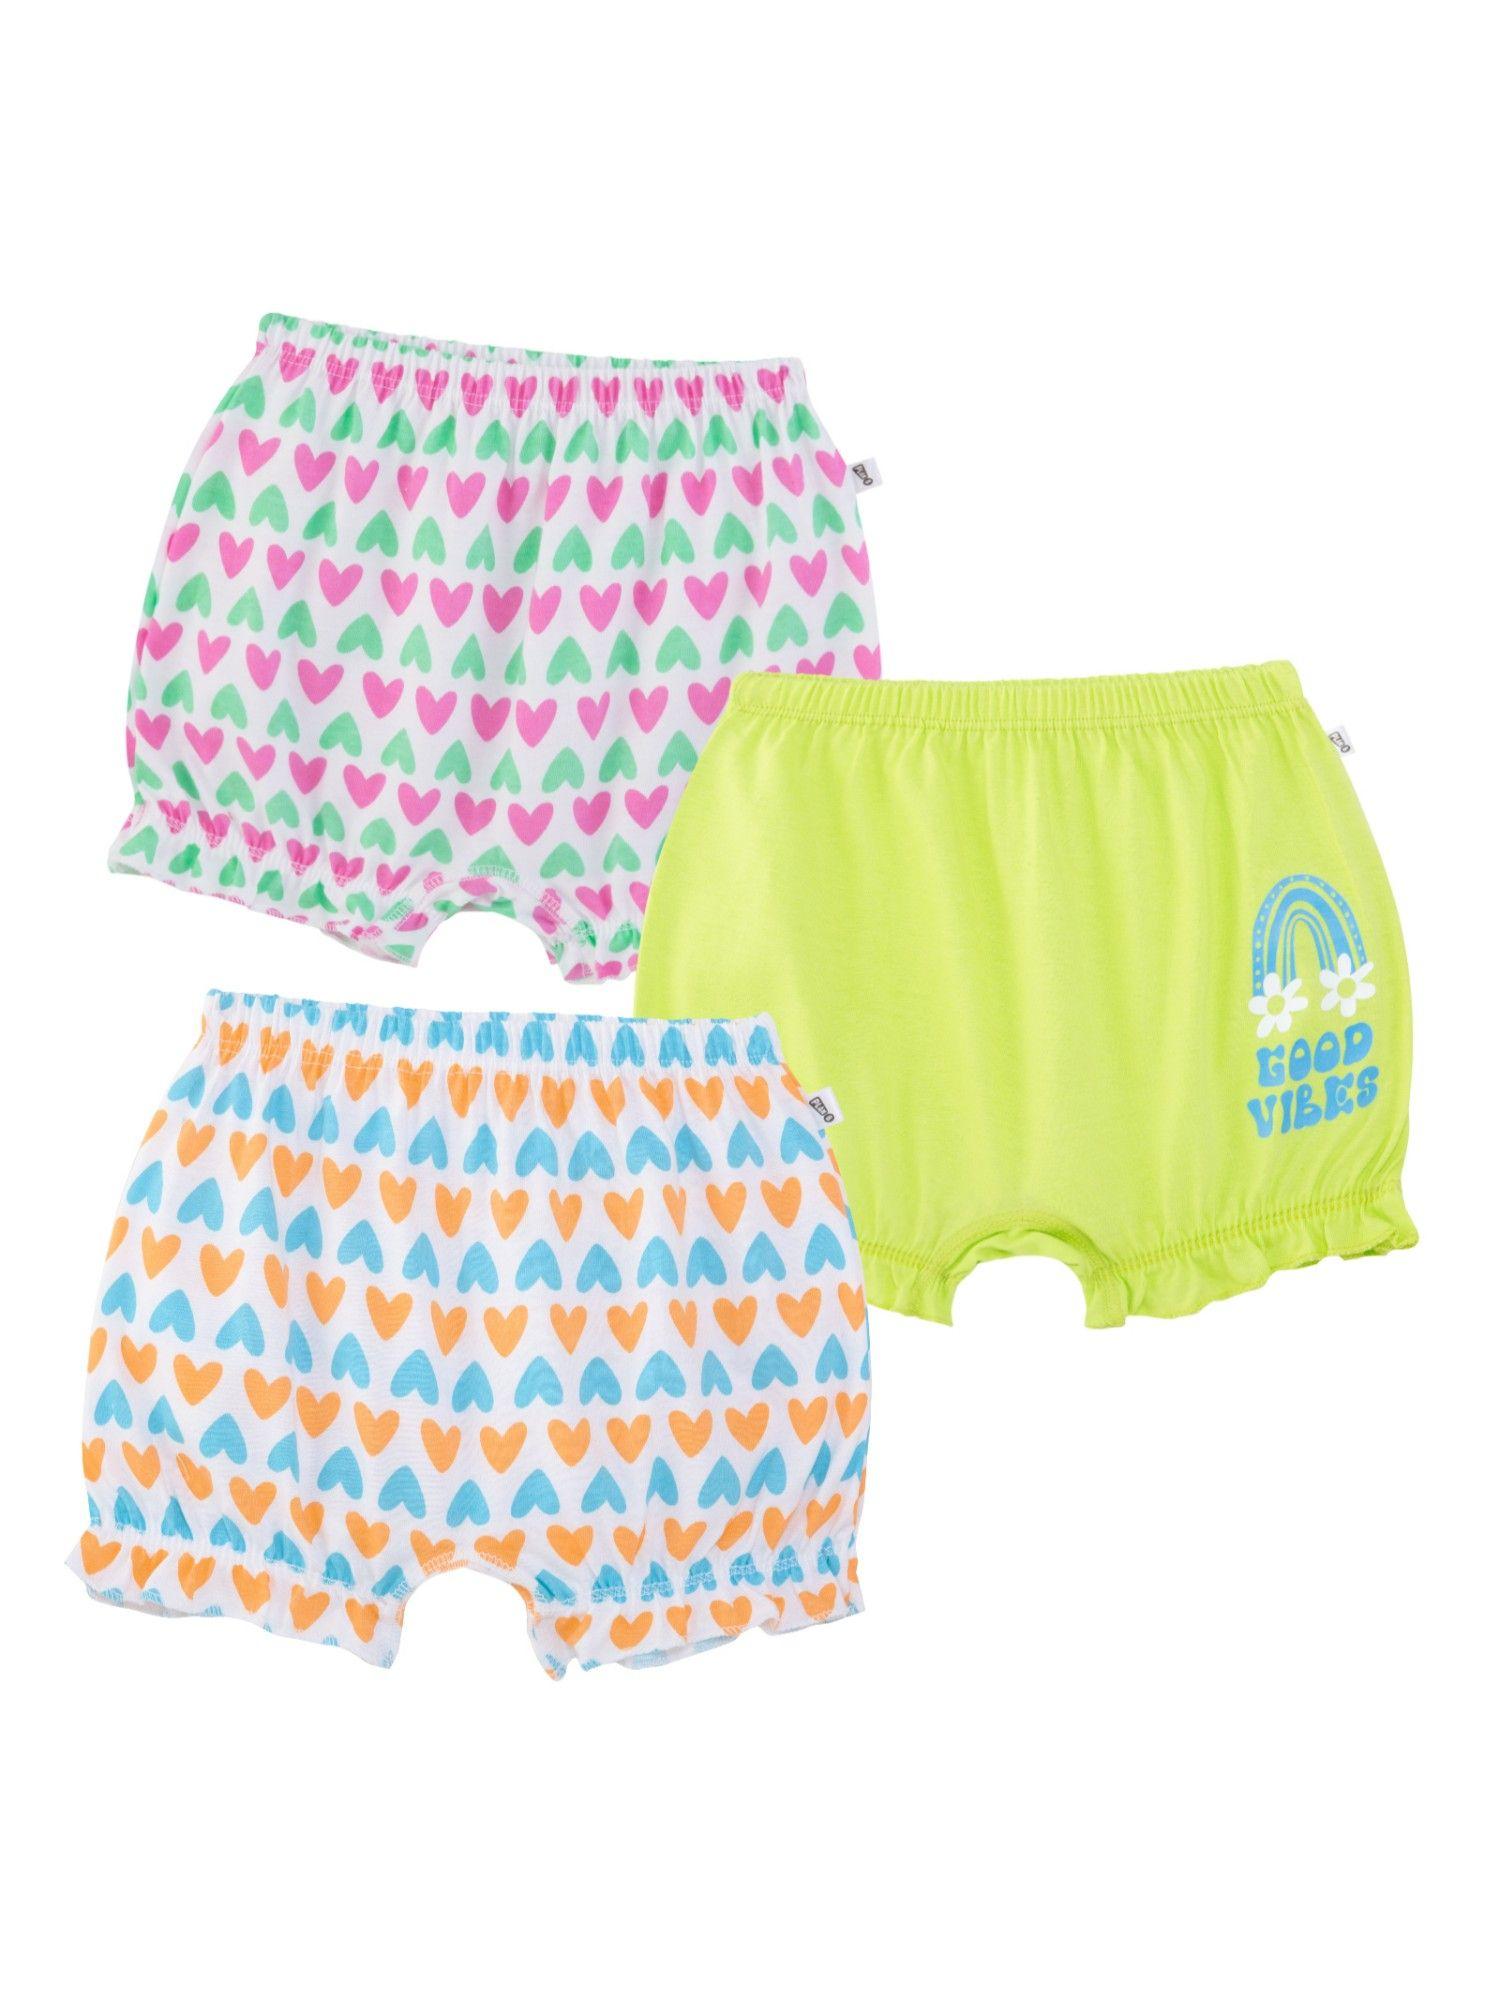 good vibes girl bloomers (pack of 3)